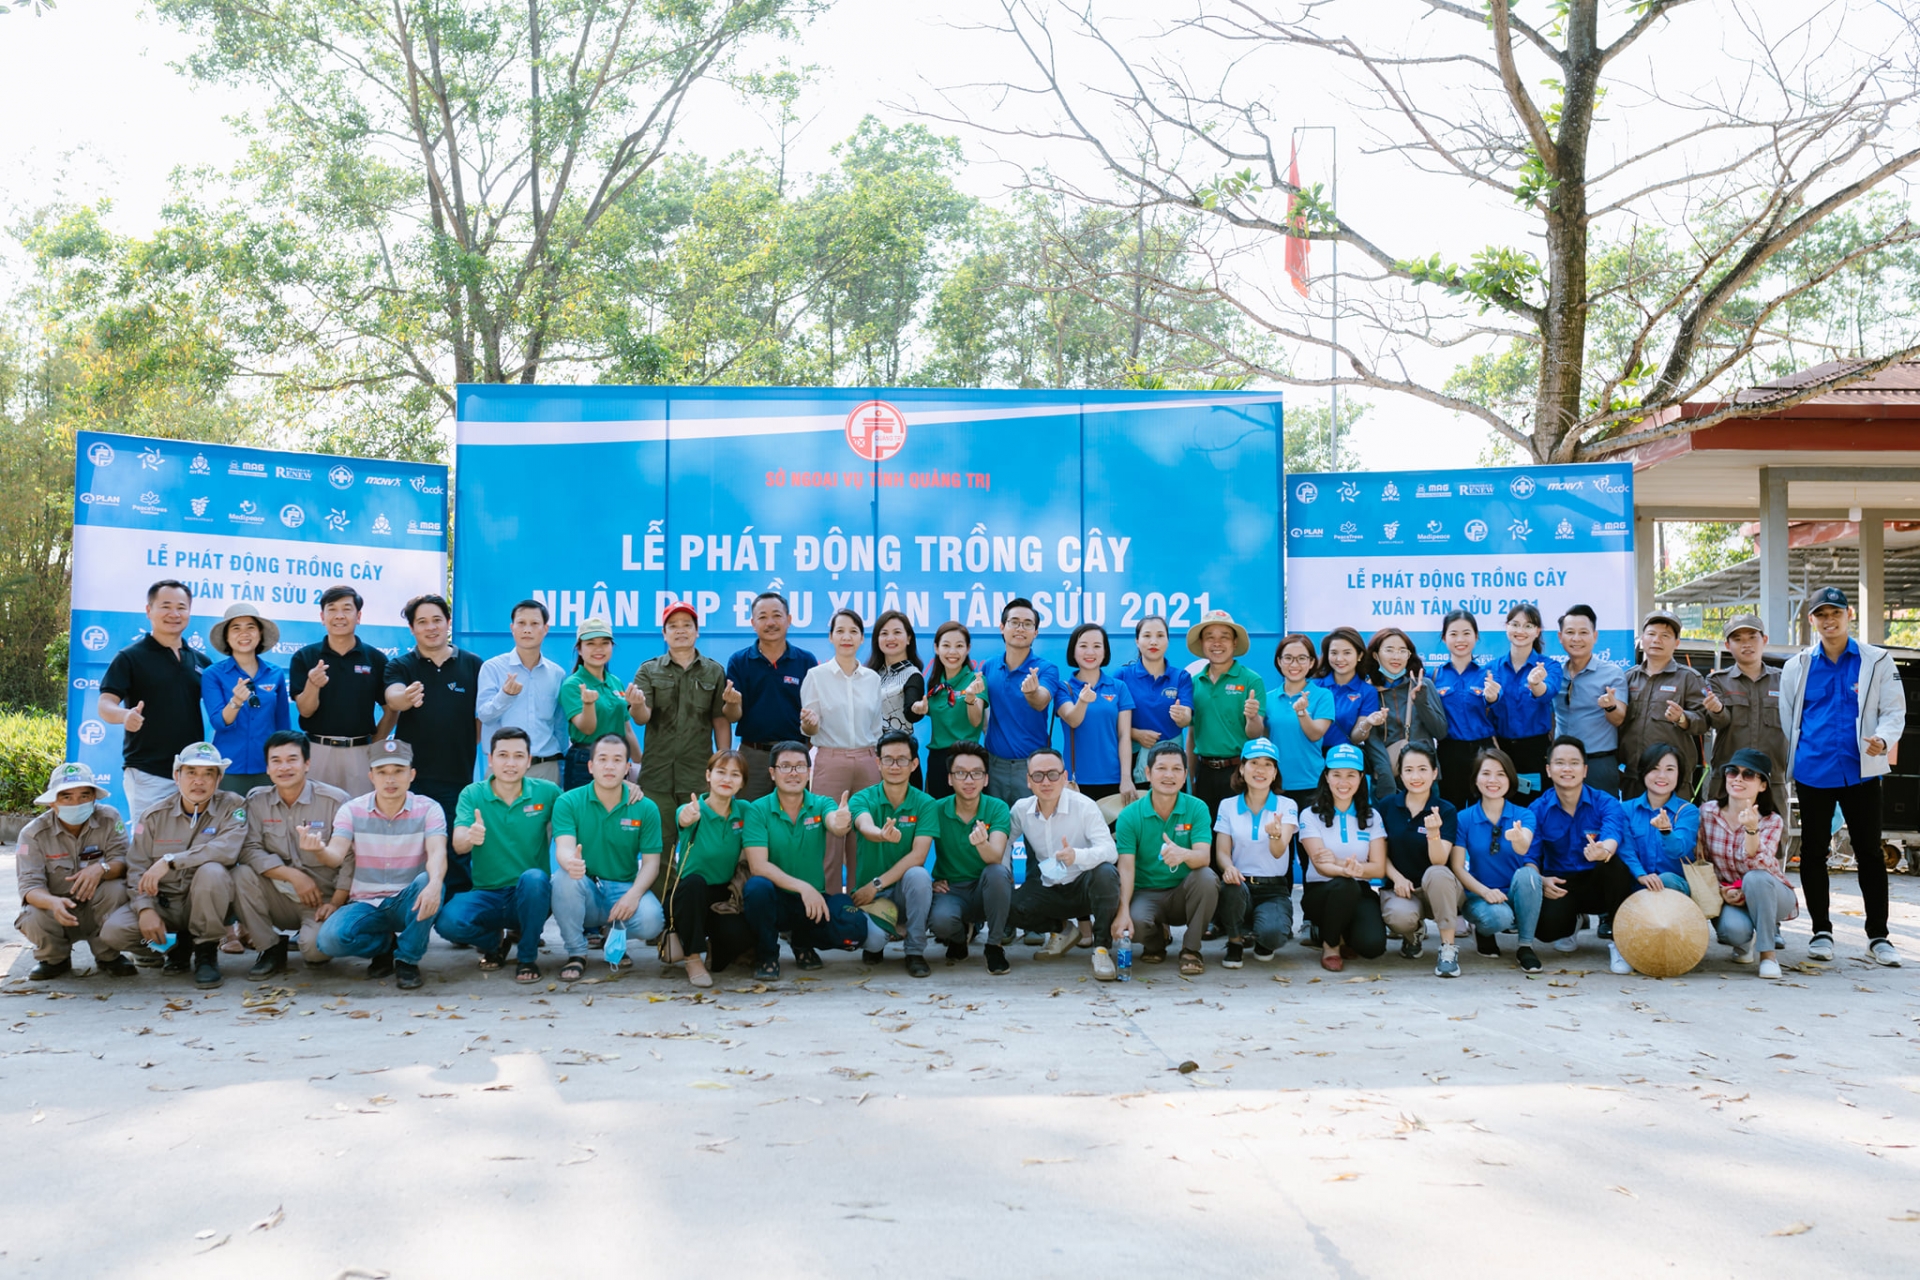 NGOs participate in tree planting festival in Quang Tri